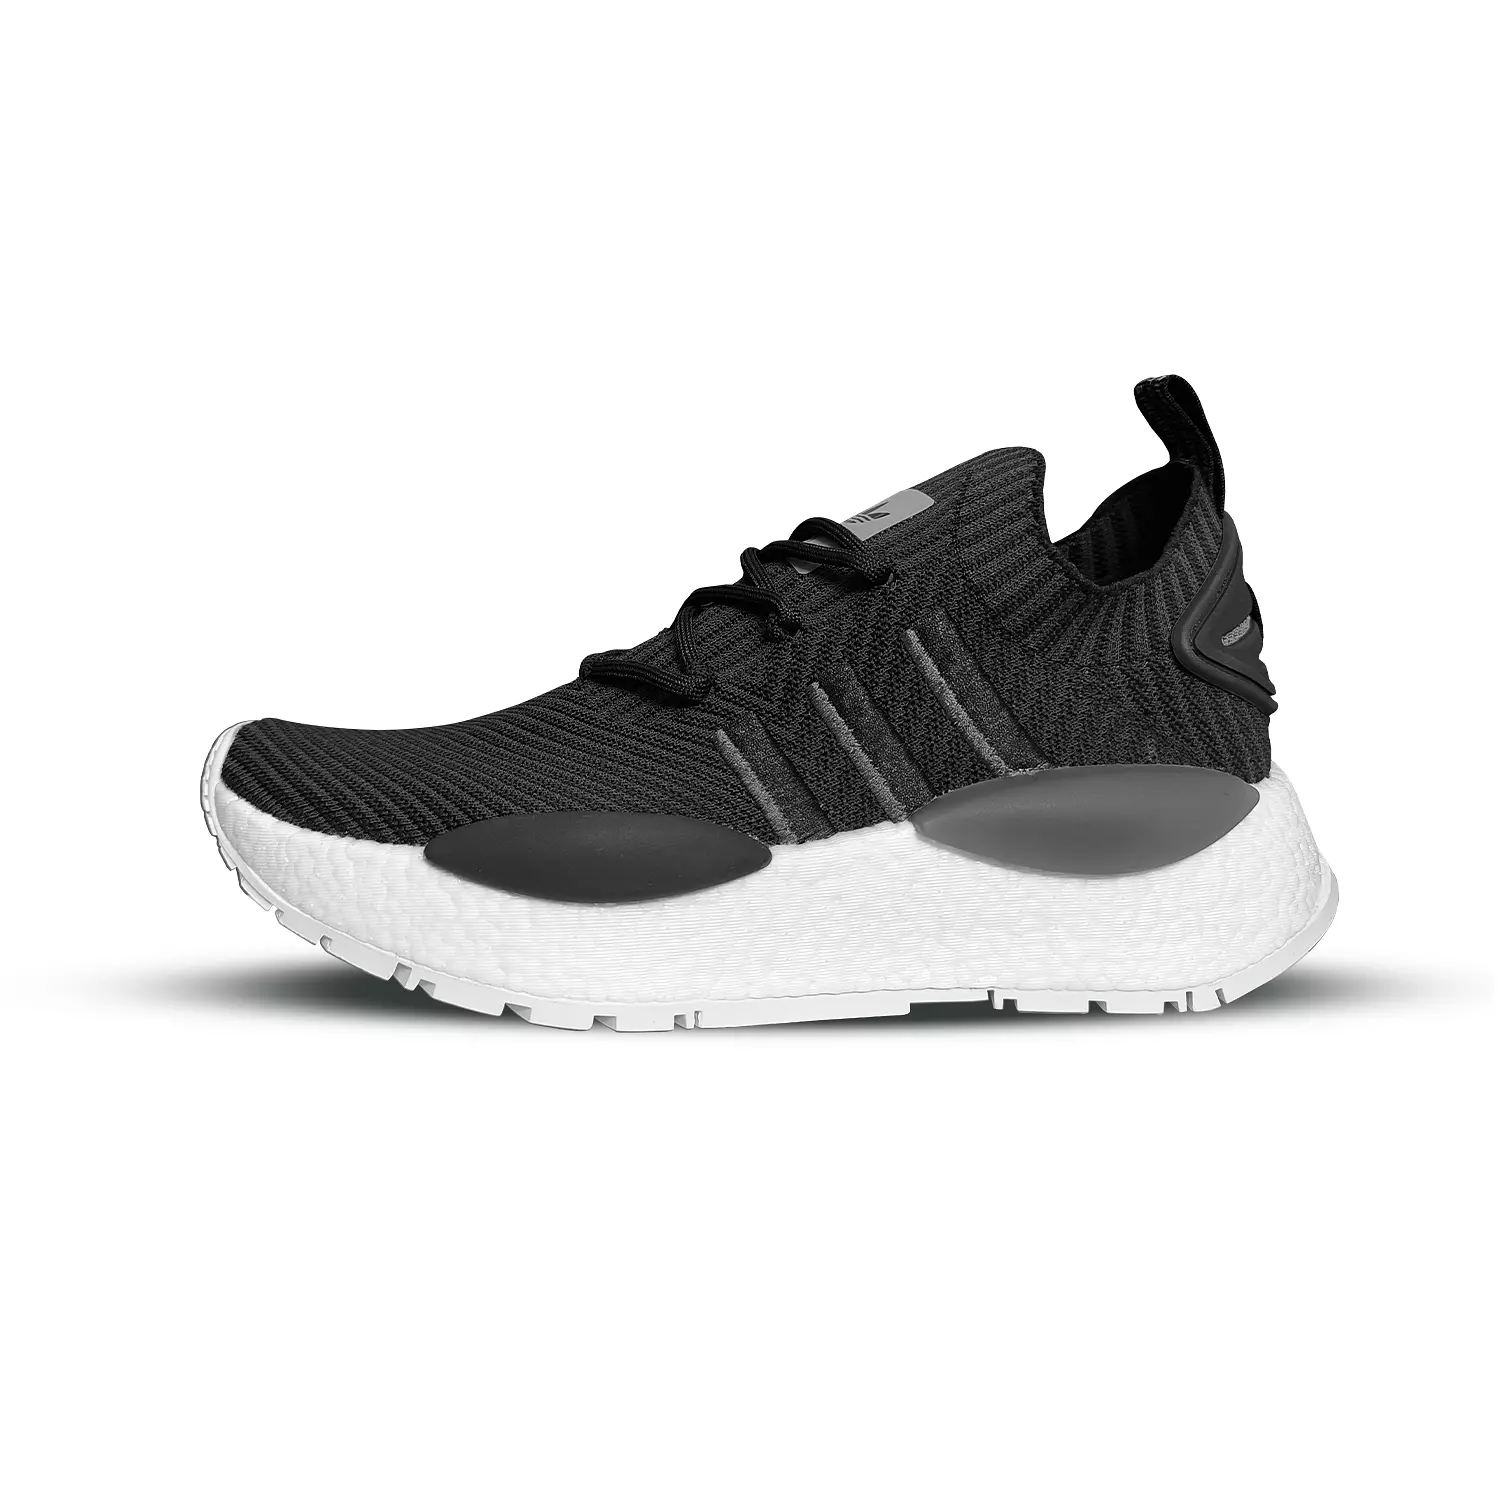 ADIDAS 3 LINE - RUNNING SHOES 0